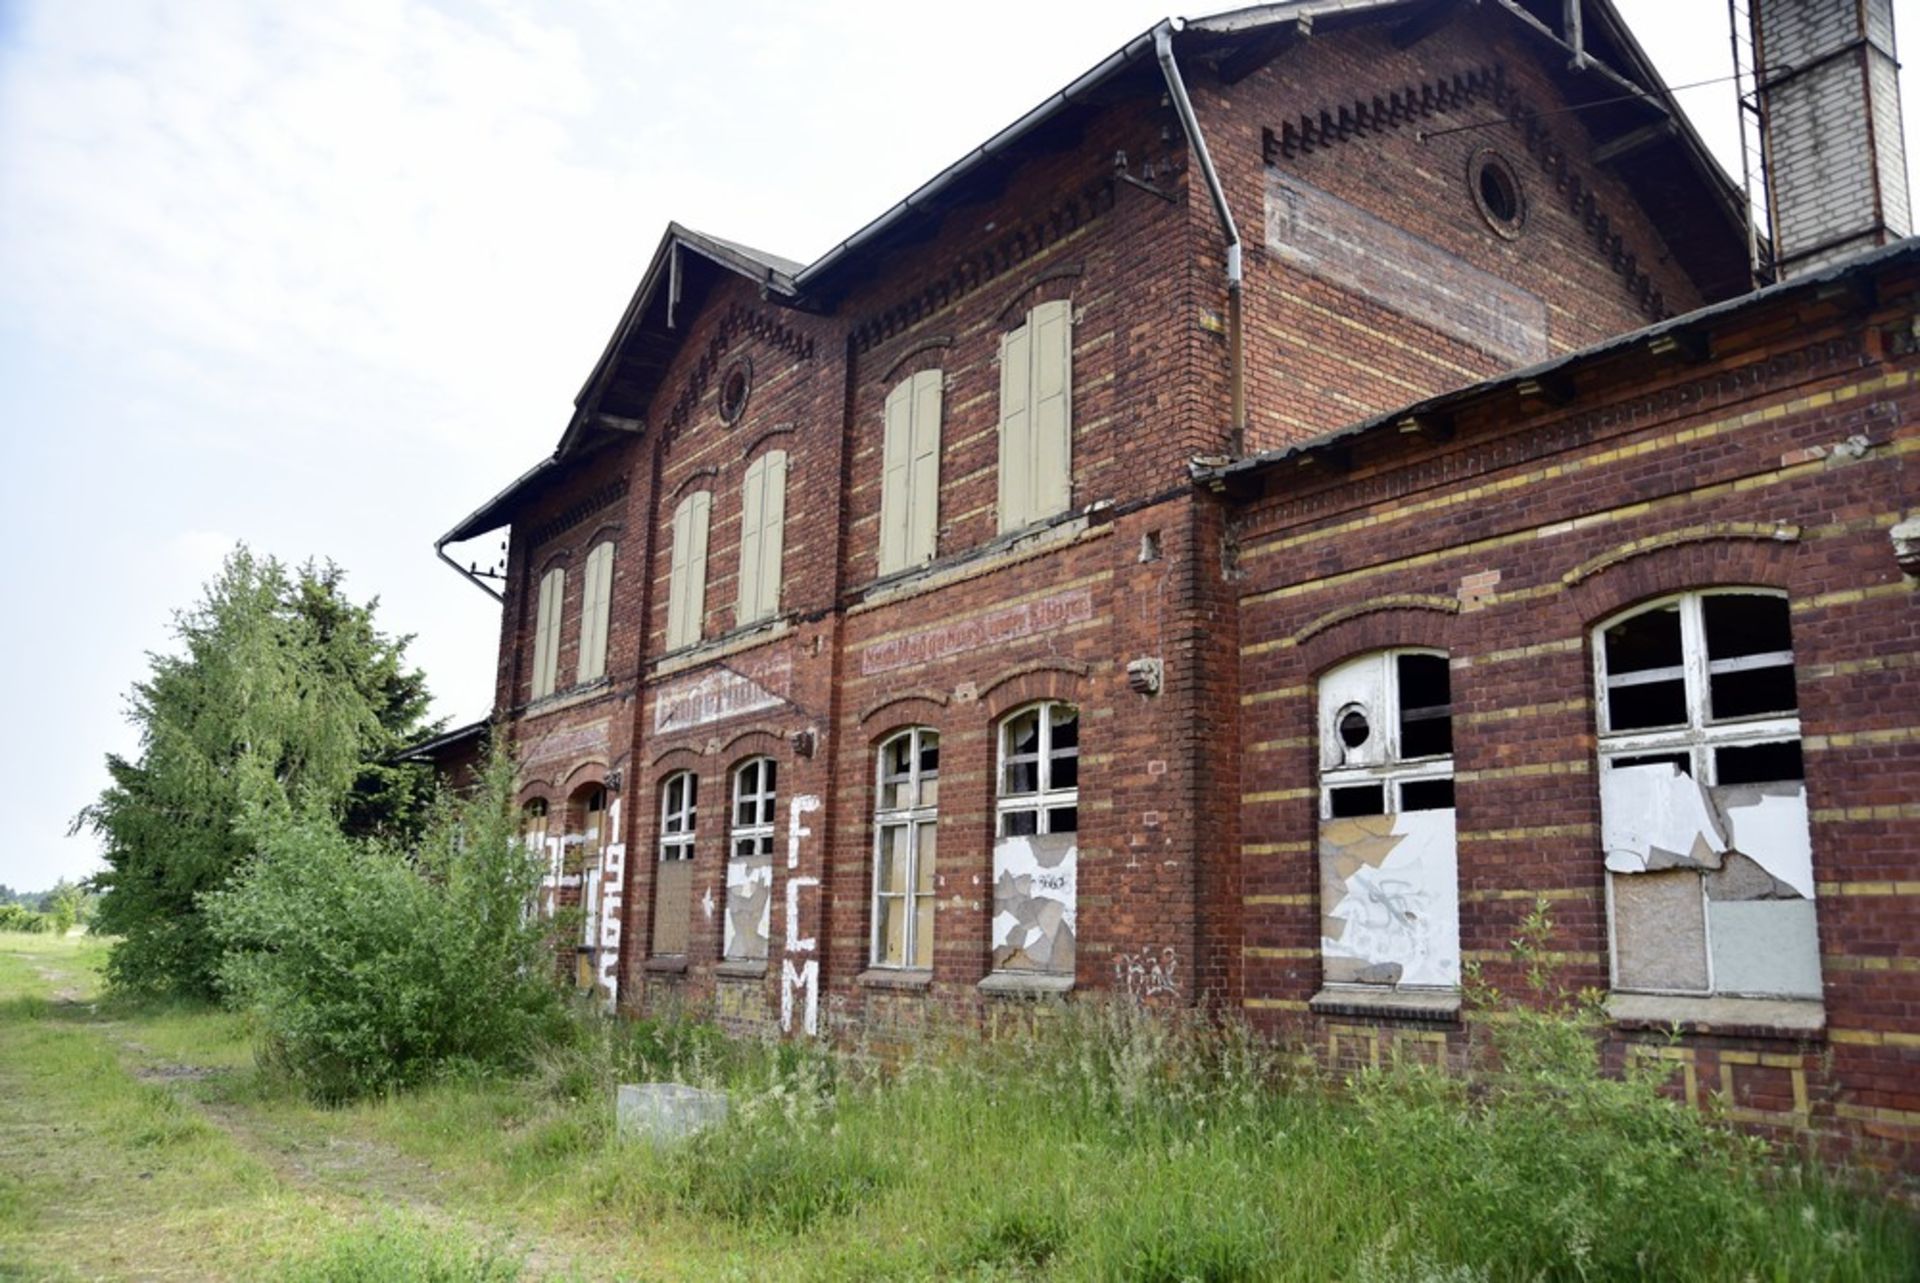 STATION HOUSE, GOODS SHED, OVER ONE ACRE Tangerhütte, Saxony, Germany, - Image 10 of 98